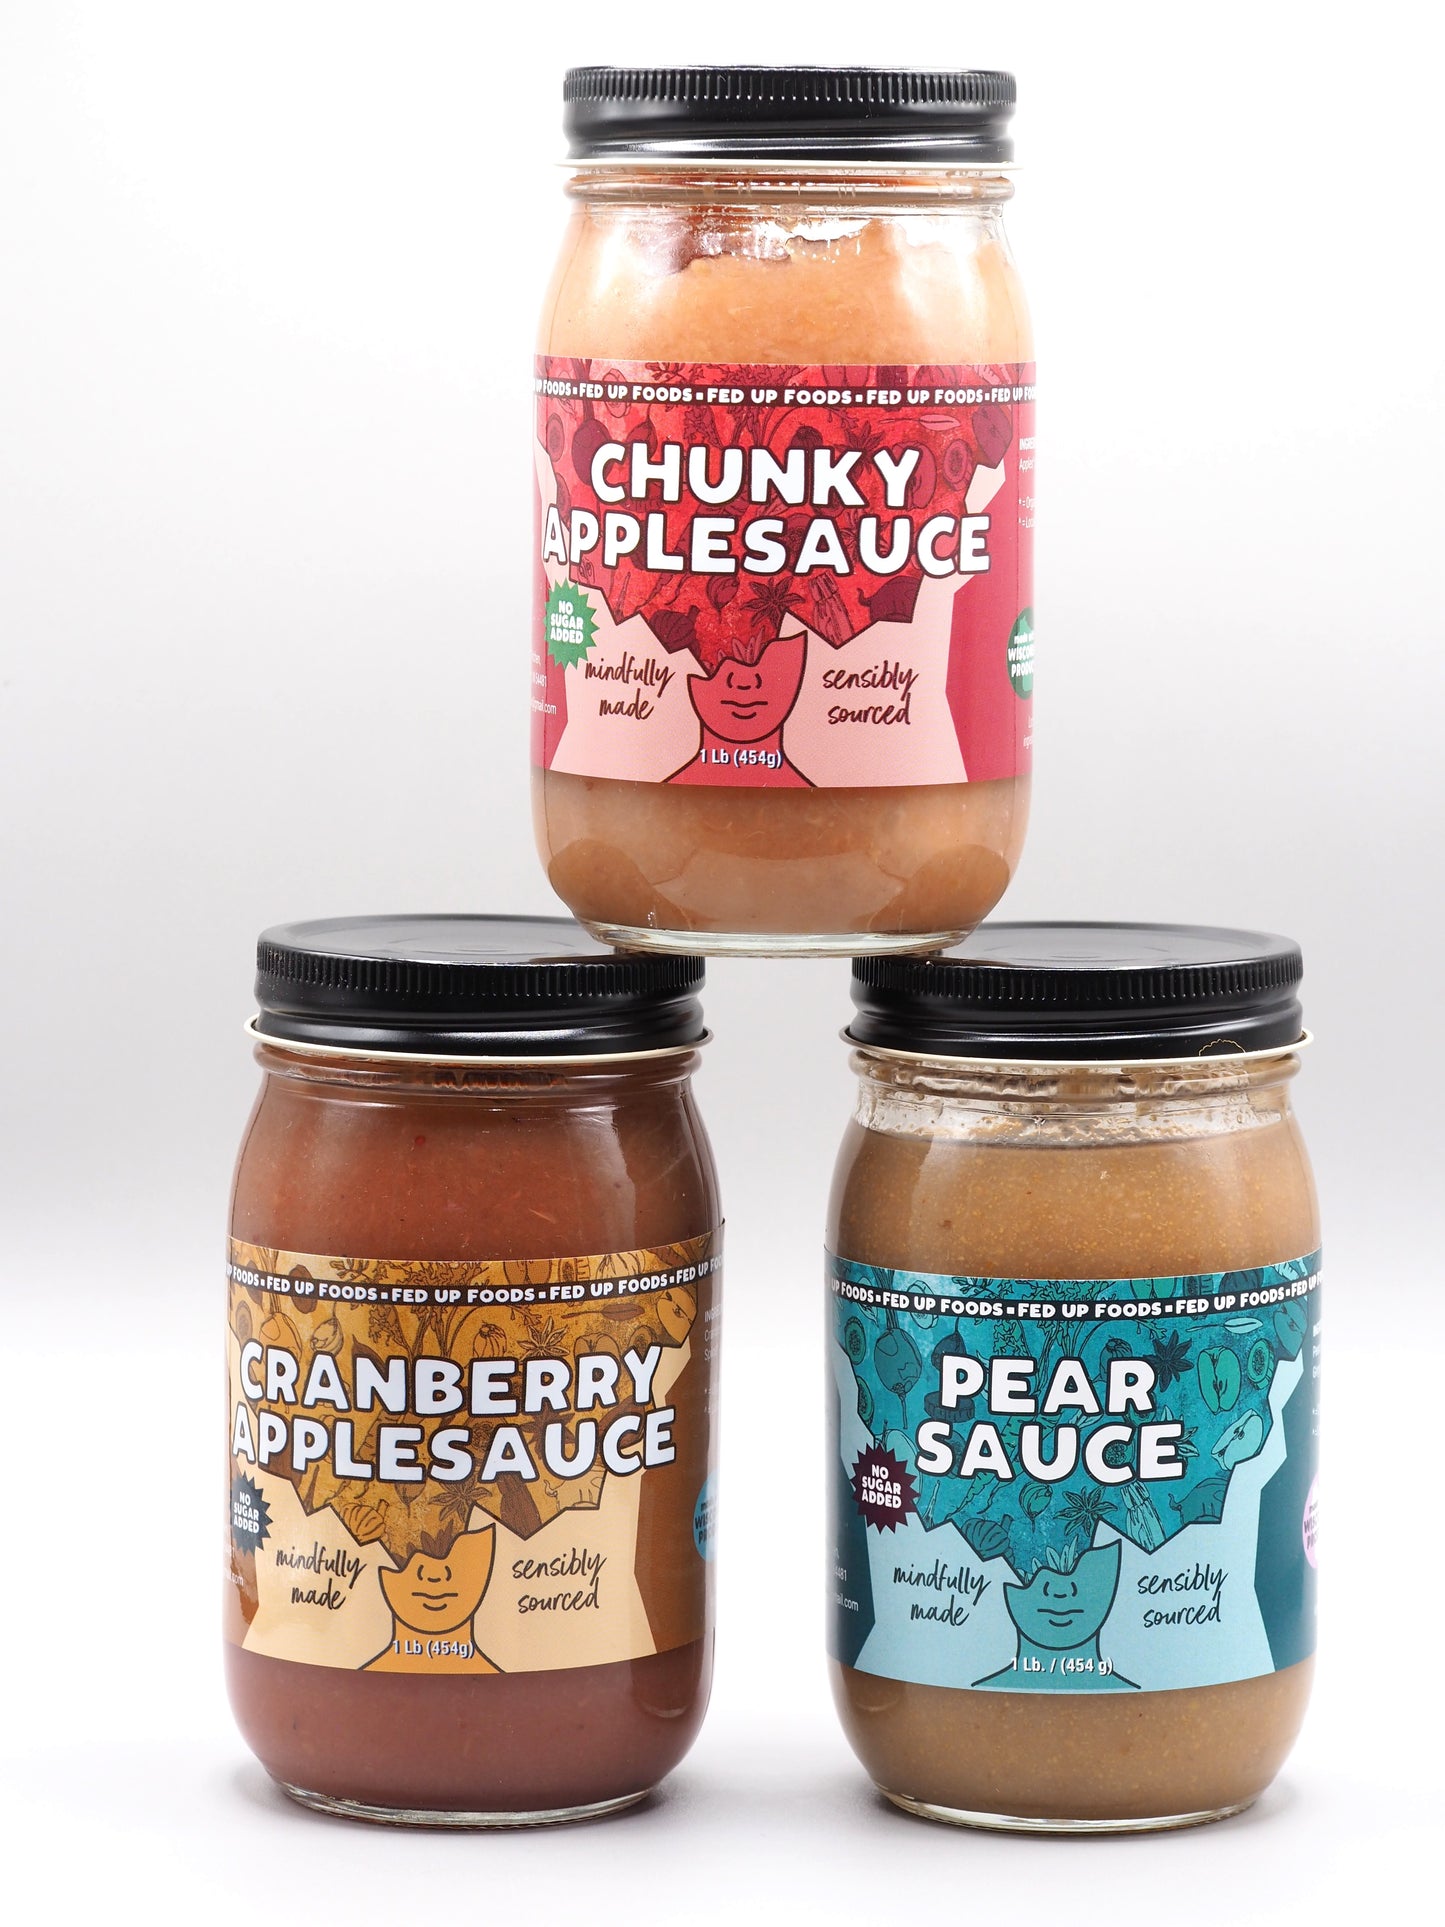 Fed Up Foods Chunky Applesauce Cranberry Applesauce and Pear Sauce in a 3 pack build your own variety pack